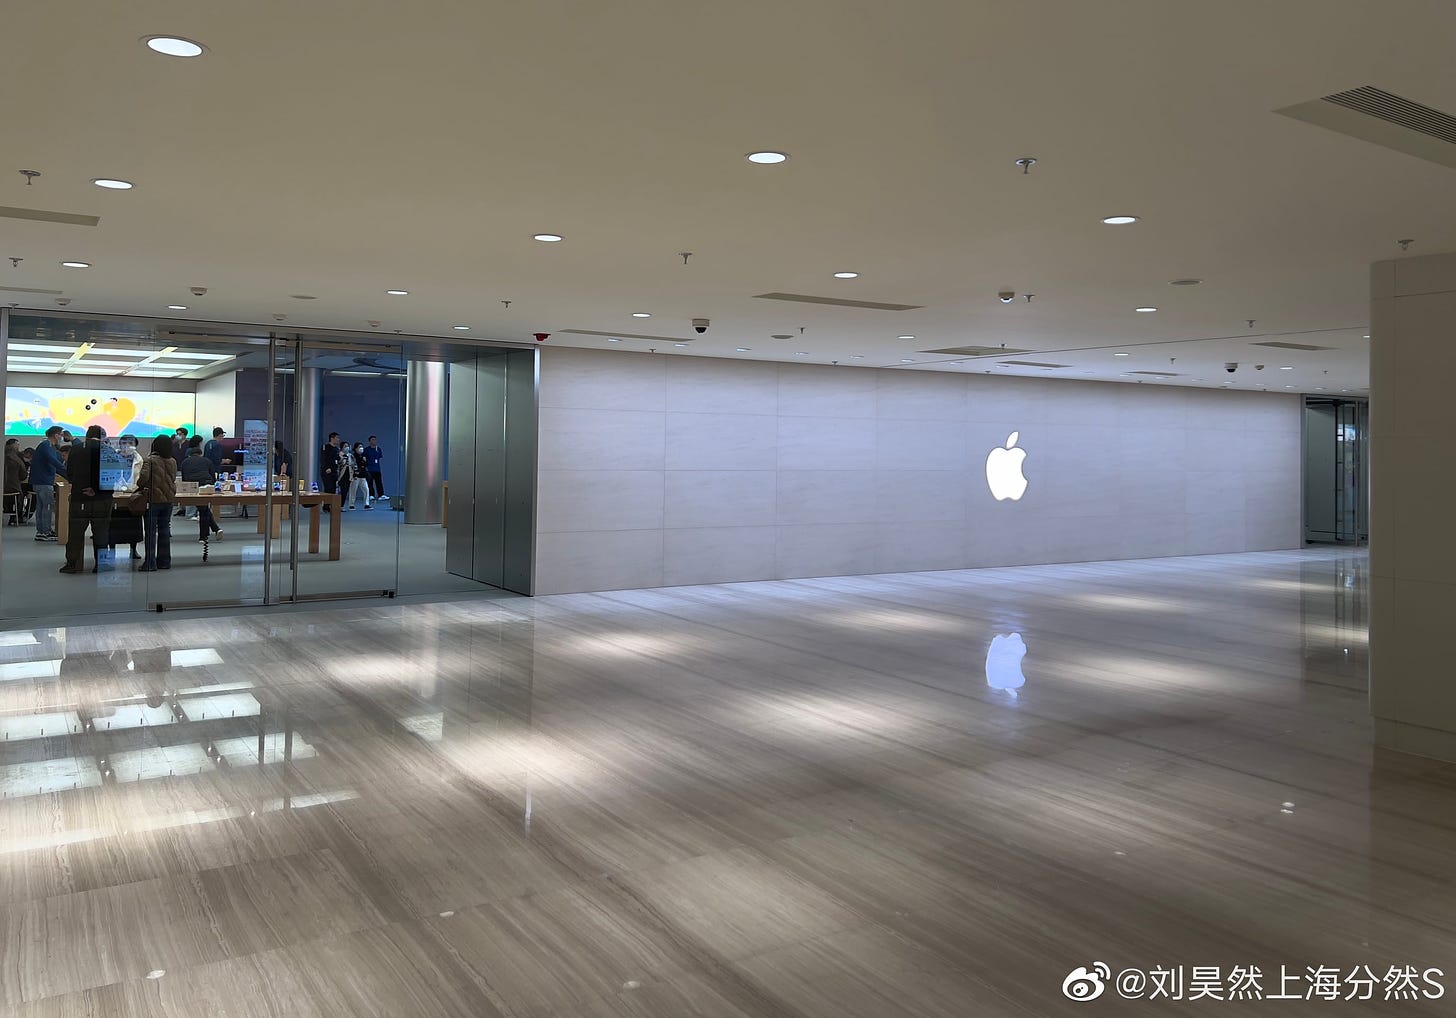 The new entrance at Apple Pudong.